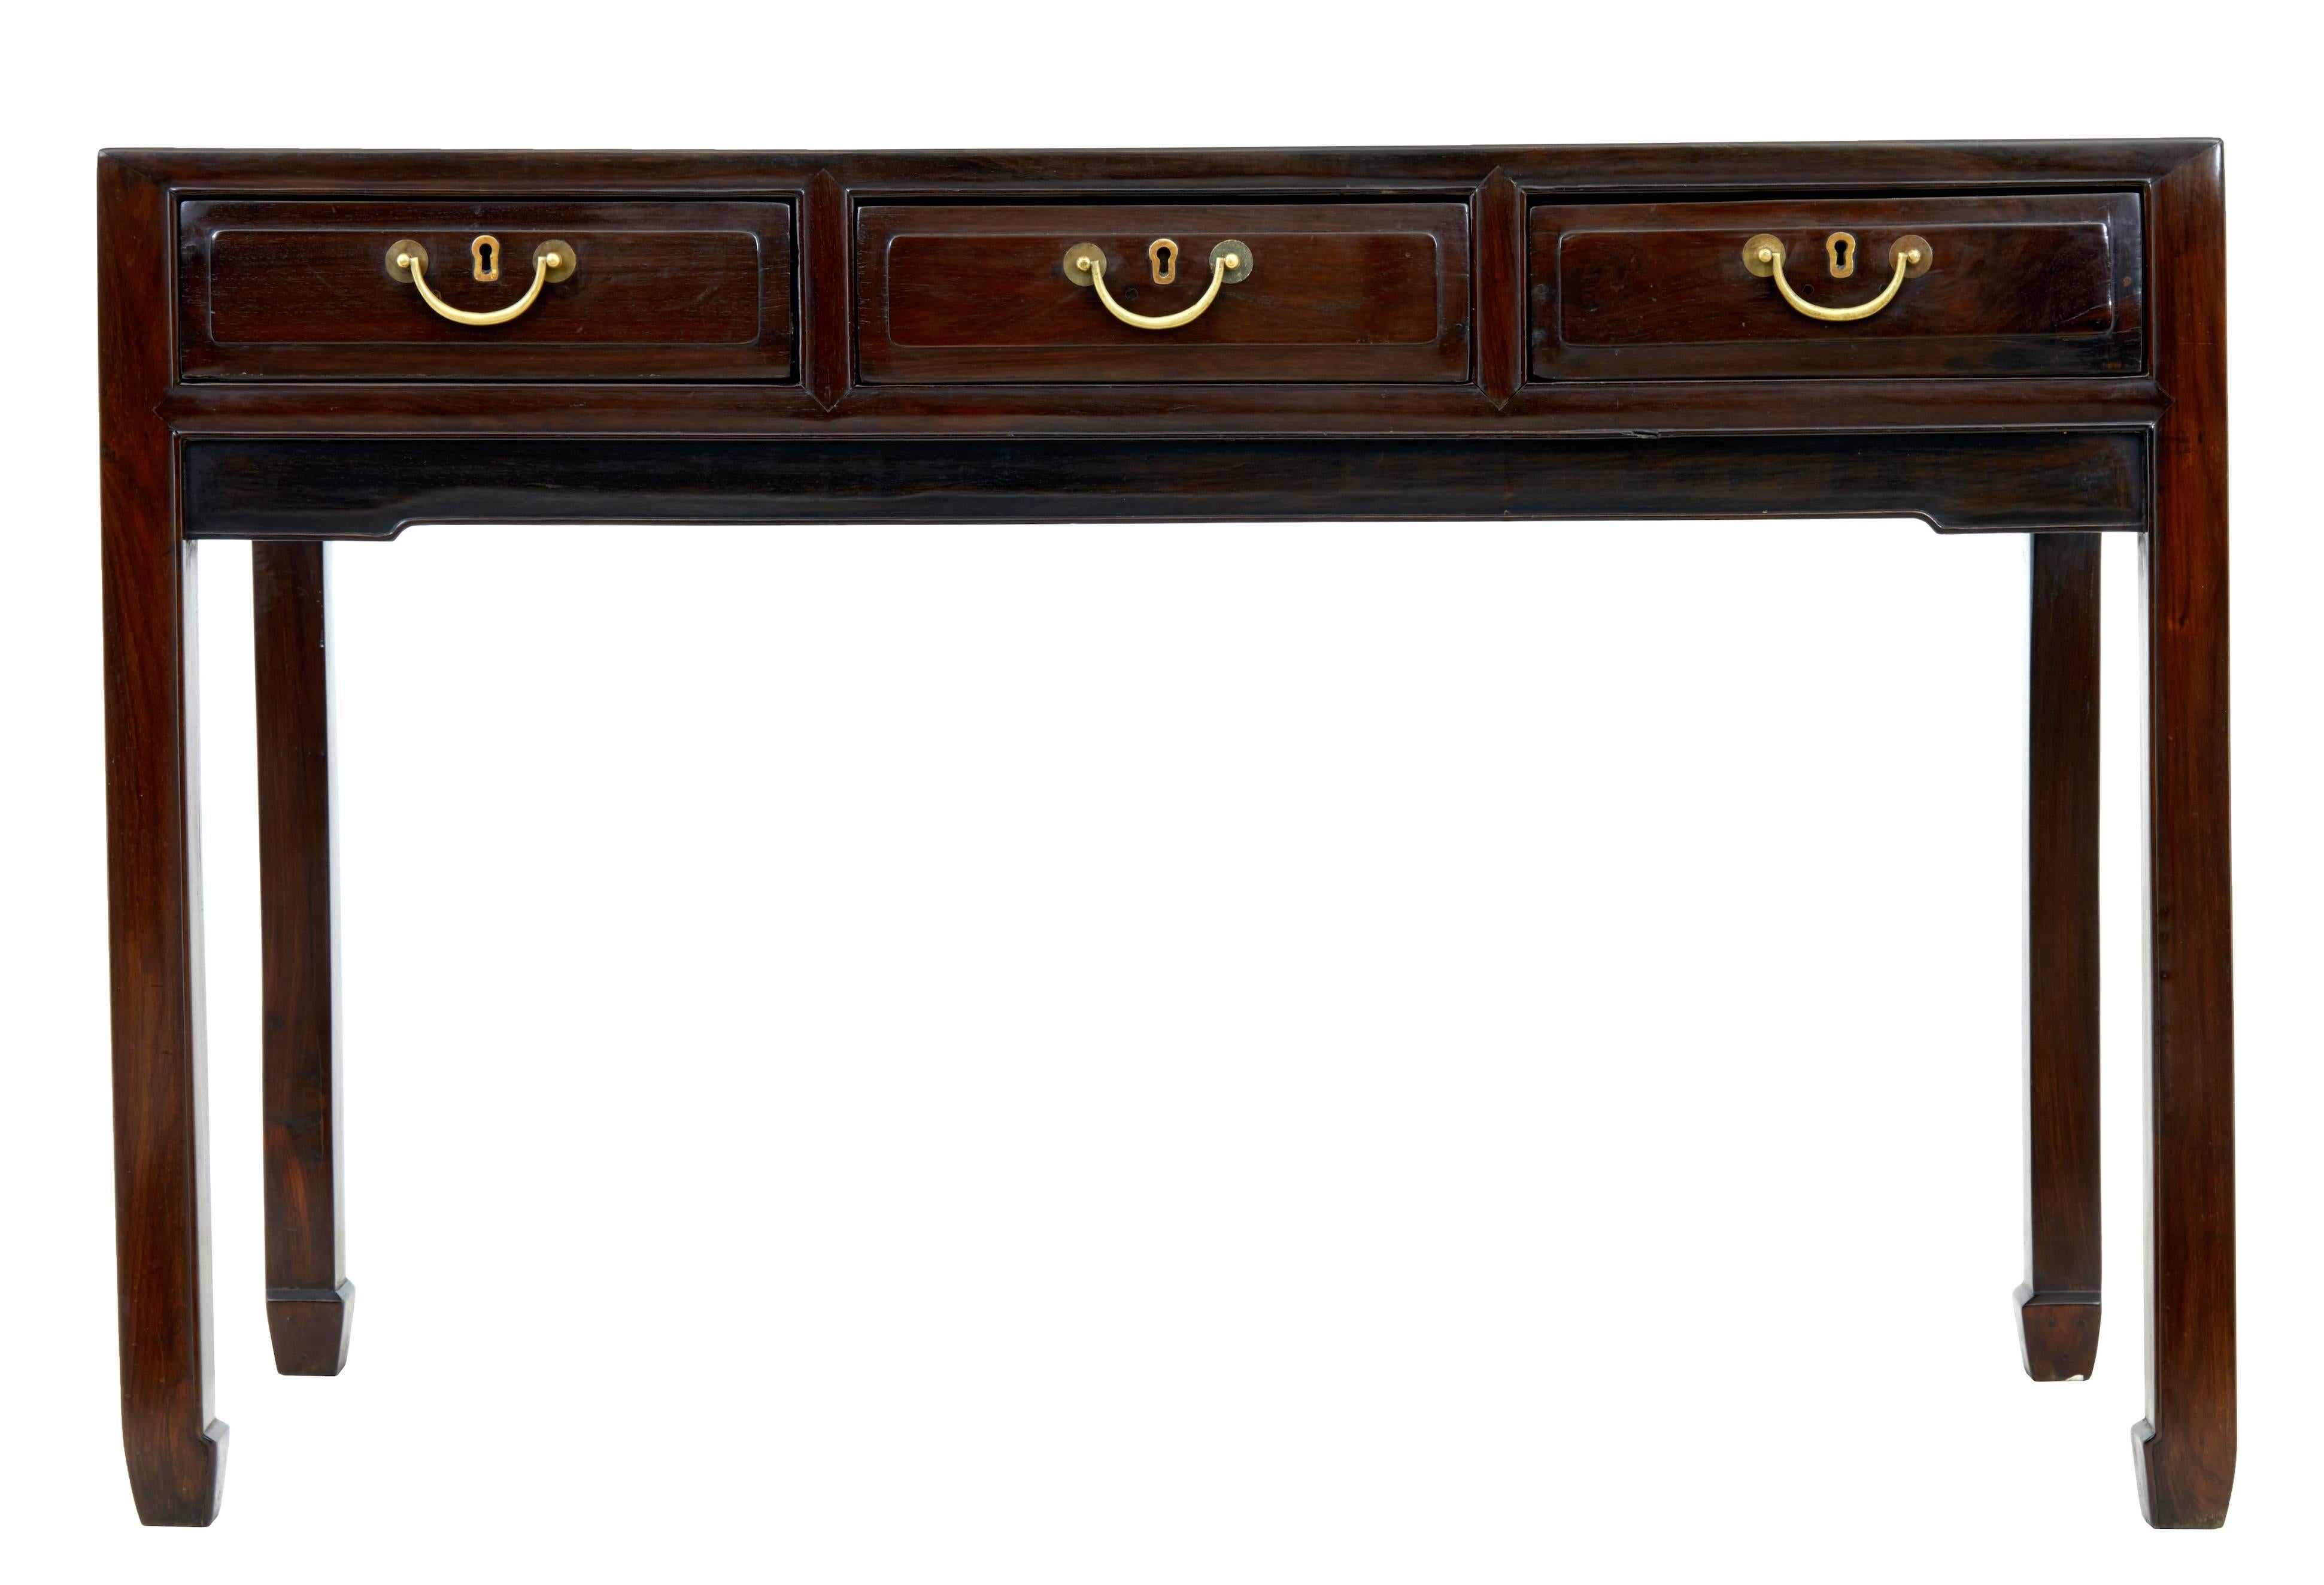 Good quality early 19th century three-drawer desk, circa 1830. Ideal for use as a desk or a side table. Three drawers with original swan neck brass handles. Standing on four straight legs. Measures: Height 32 1/4